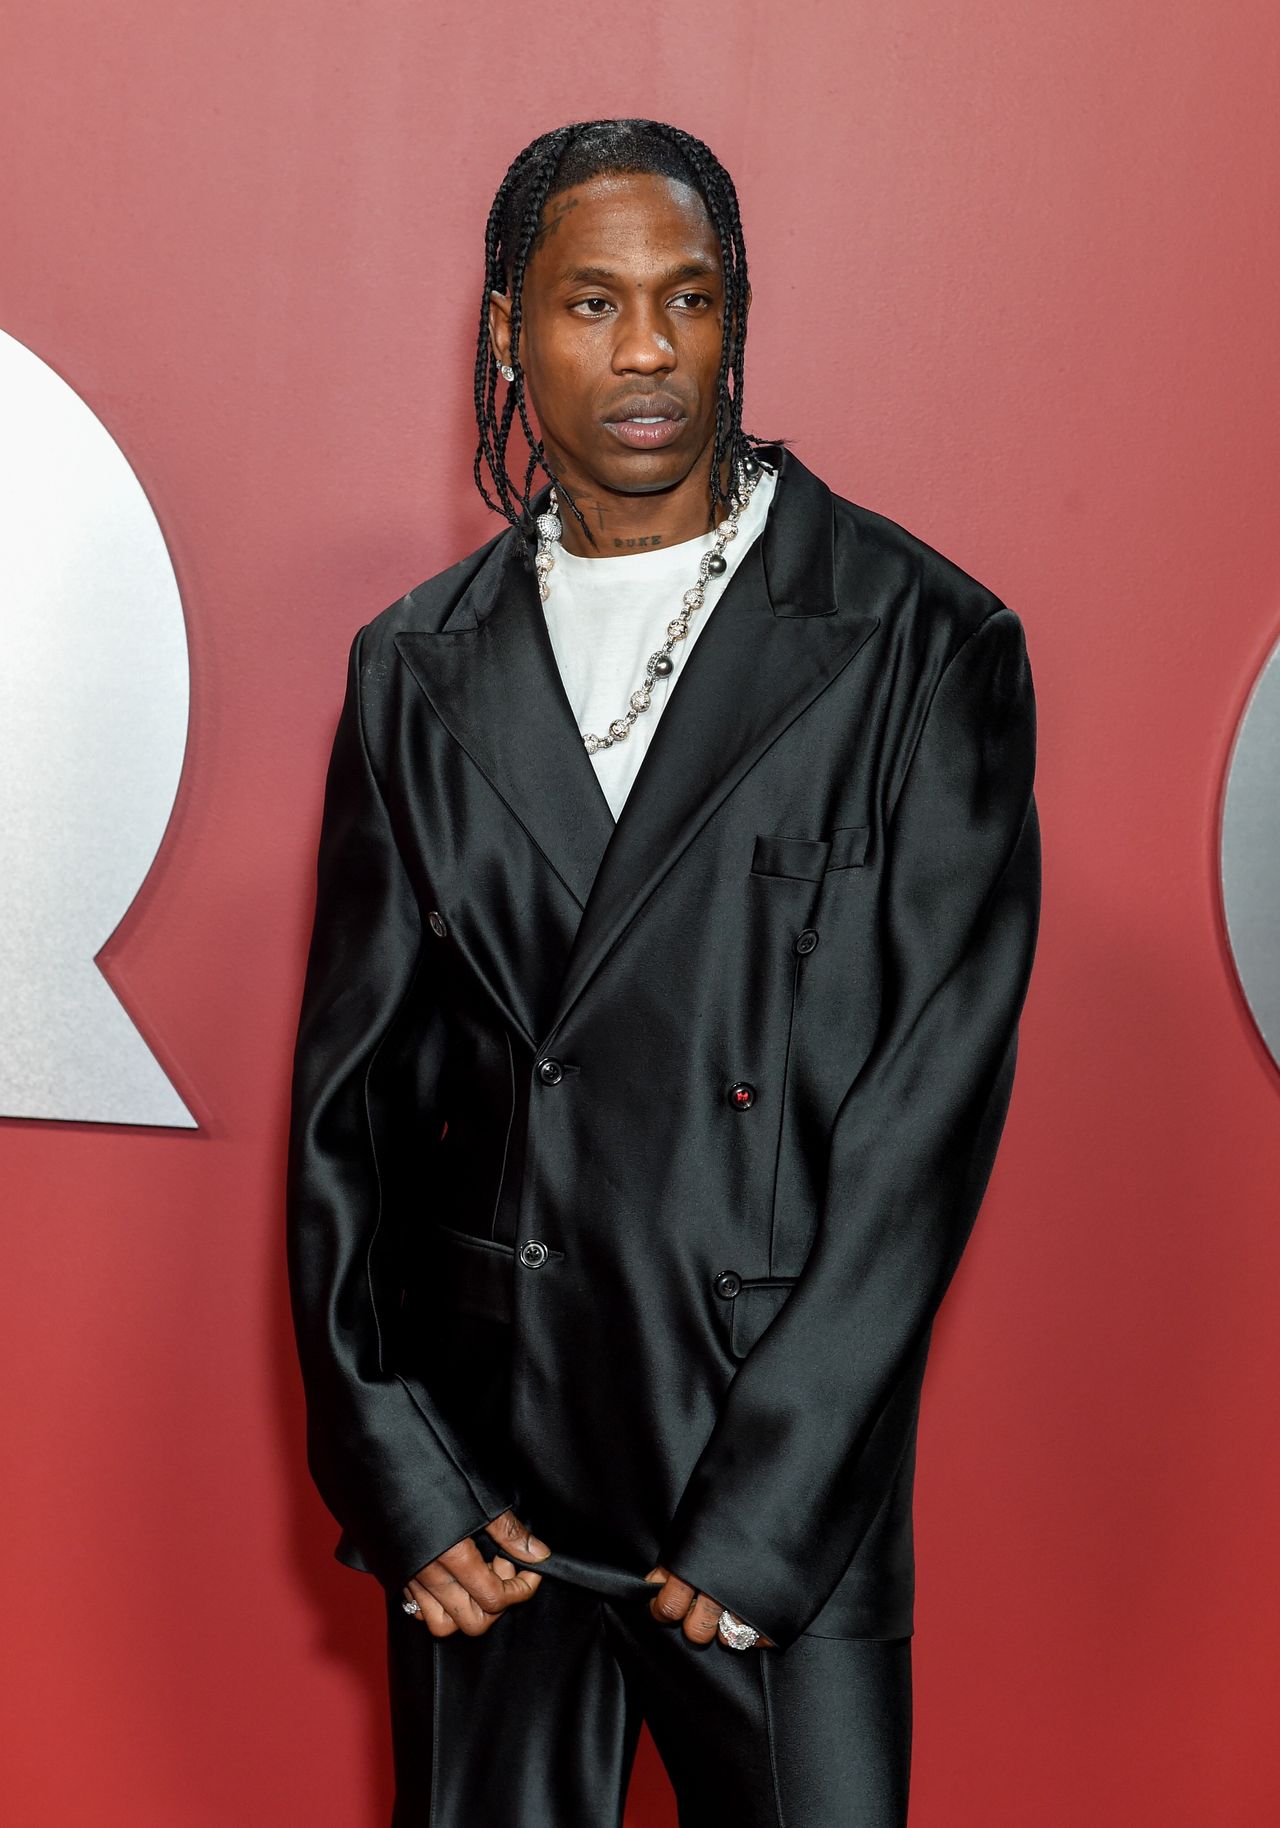 Did Travis Scott stab Kylie Jenner? Internet users disgusted.